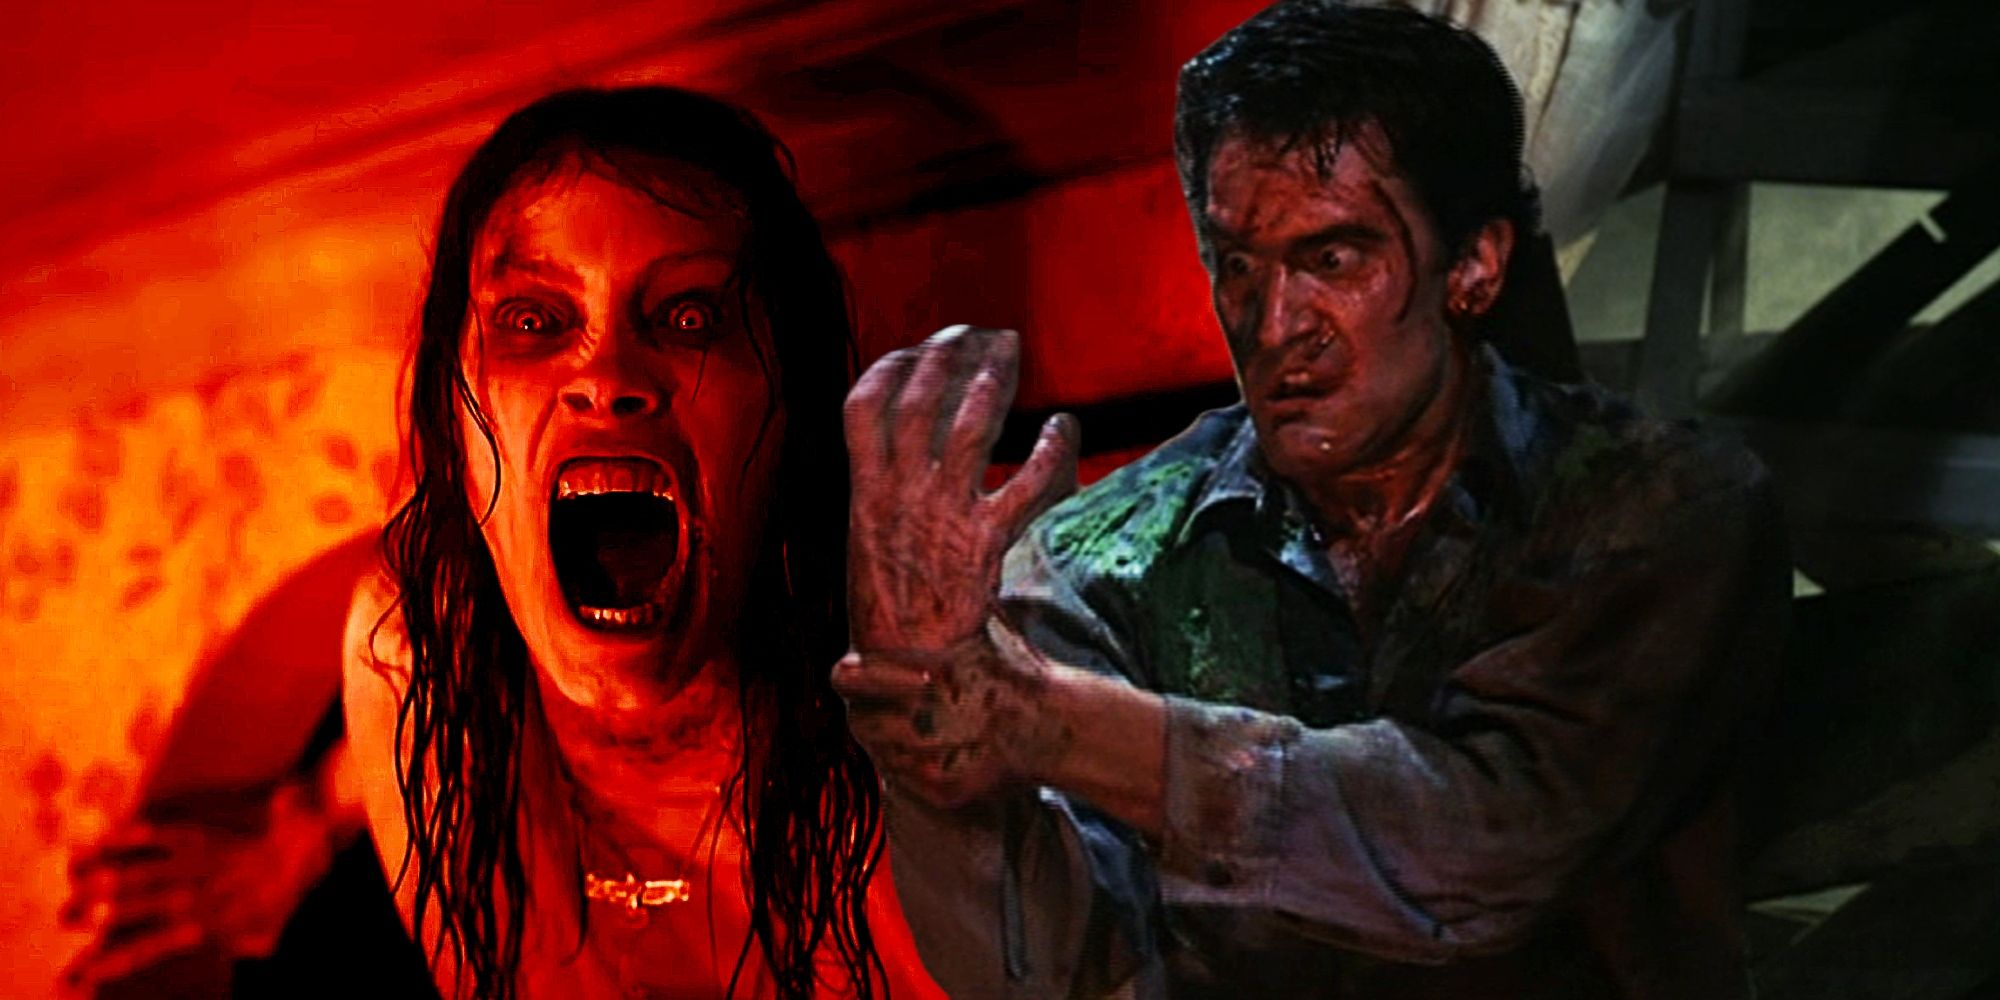 Evil Dead Rise horrifies with an official first look; everything